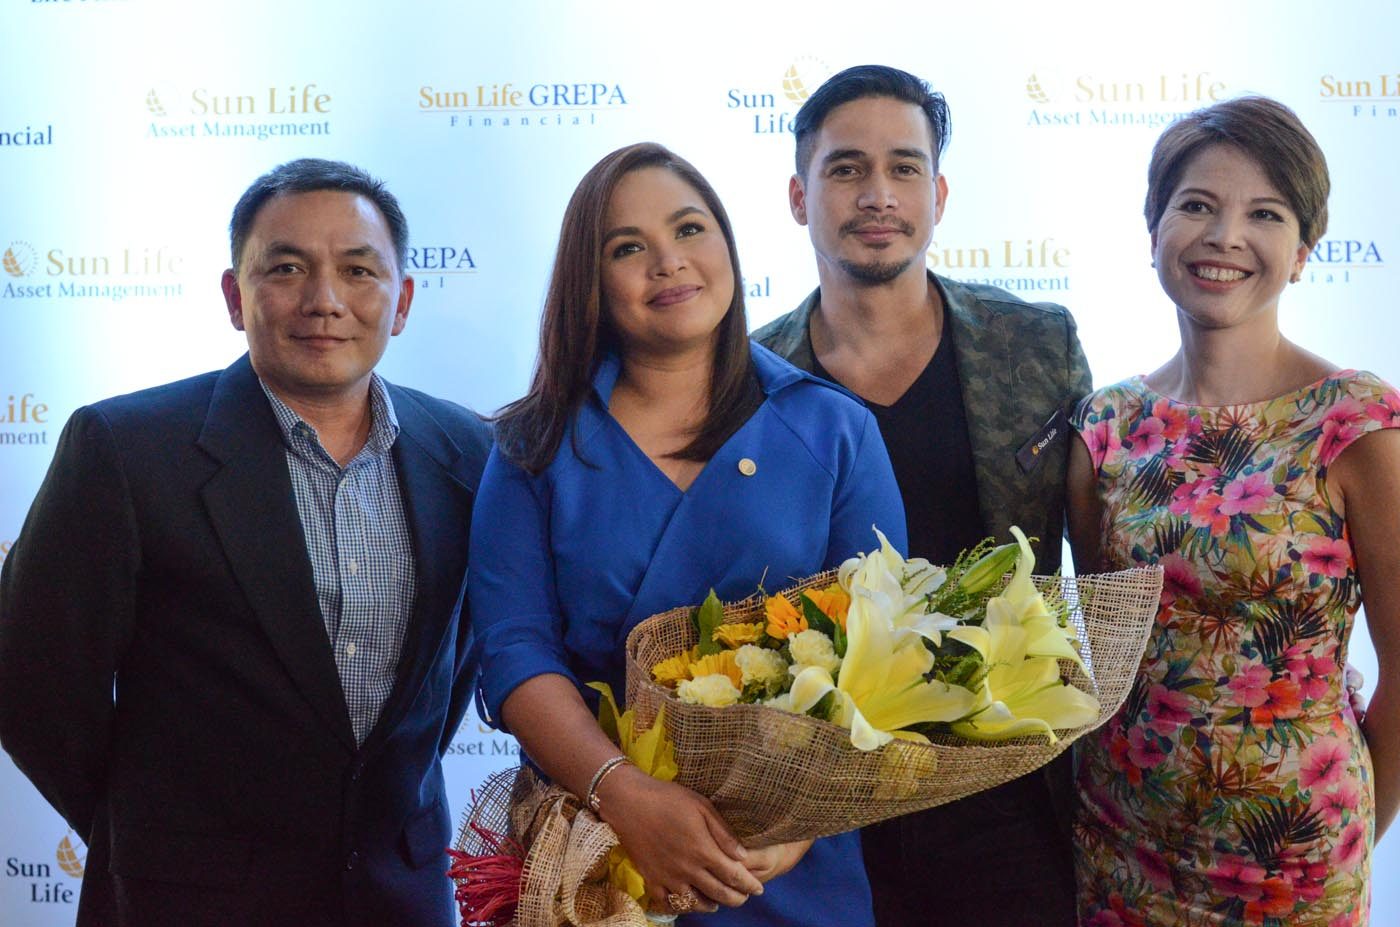 MONEY FOR LIFE. Judy Ann Santos-Agoncillo joins longtime Sun Life ambassador Piolo Pascual for the Money for Life campaign. The two stars are flanked by Gerry Tirona, Sun Life Grepa Financial, Inc. Marketing Head (left) and Mylene Daez-Lopa, Chief Marketing Officer for Sun Life of Canada (Philippines), Inc. (right). Photo by Alecs Ongcal/Rappler   